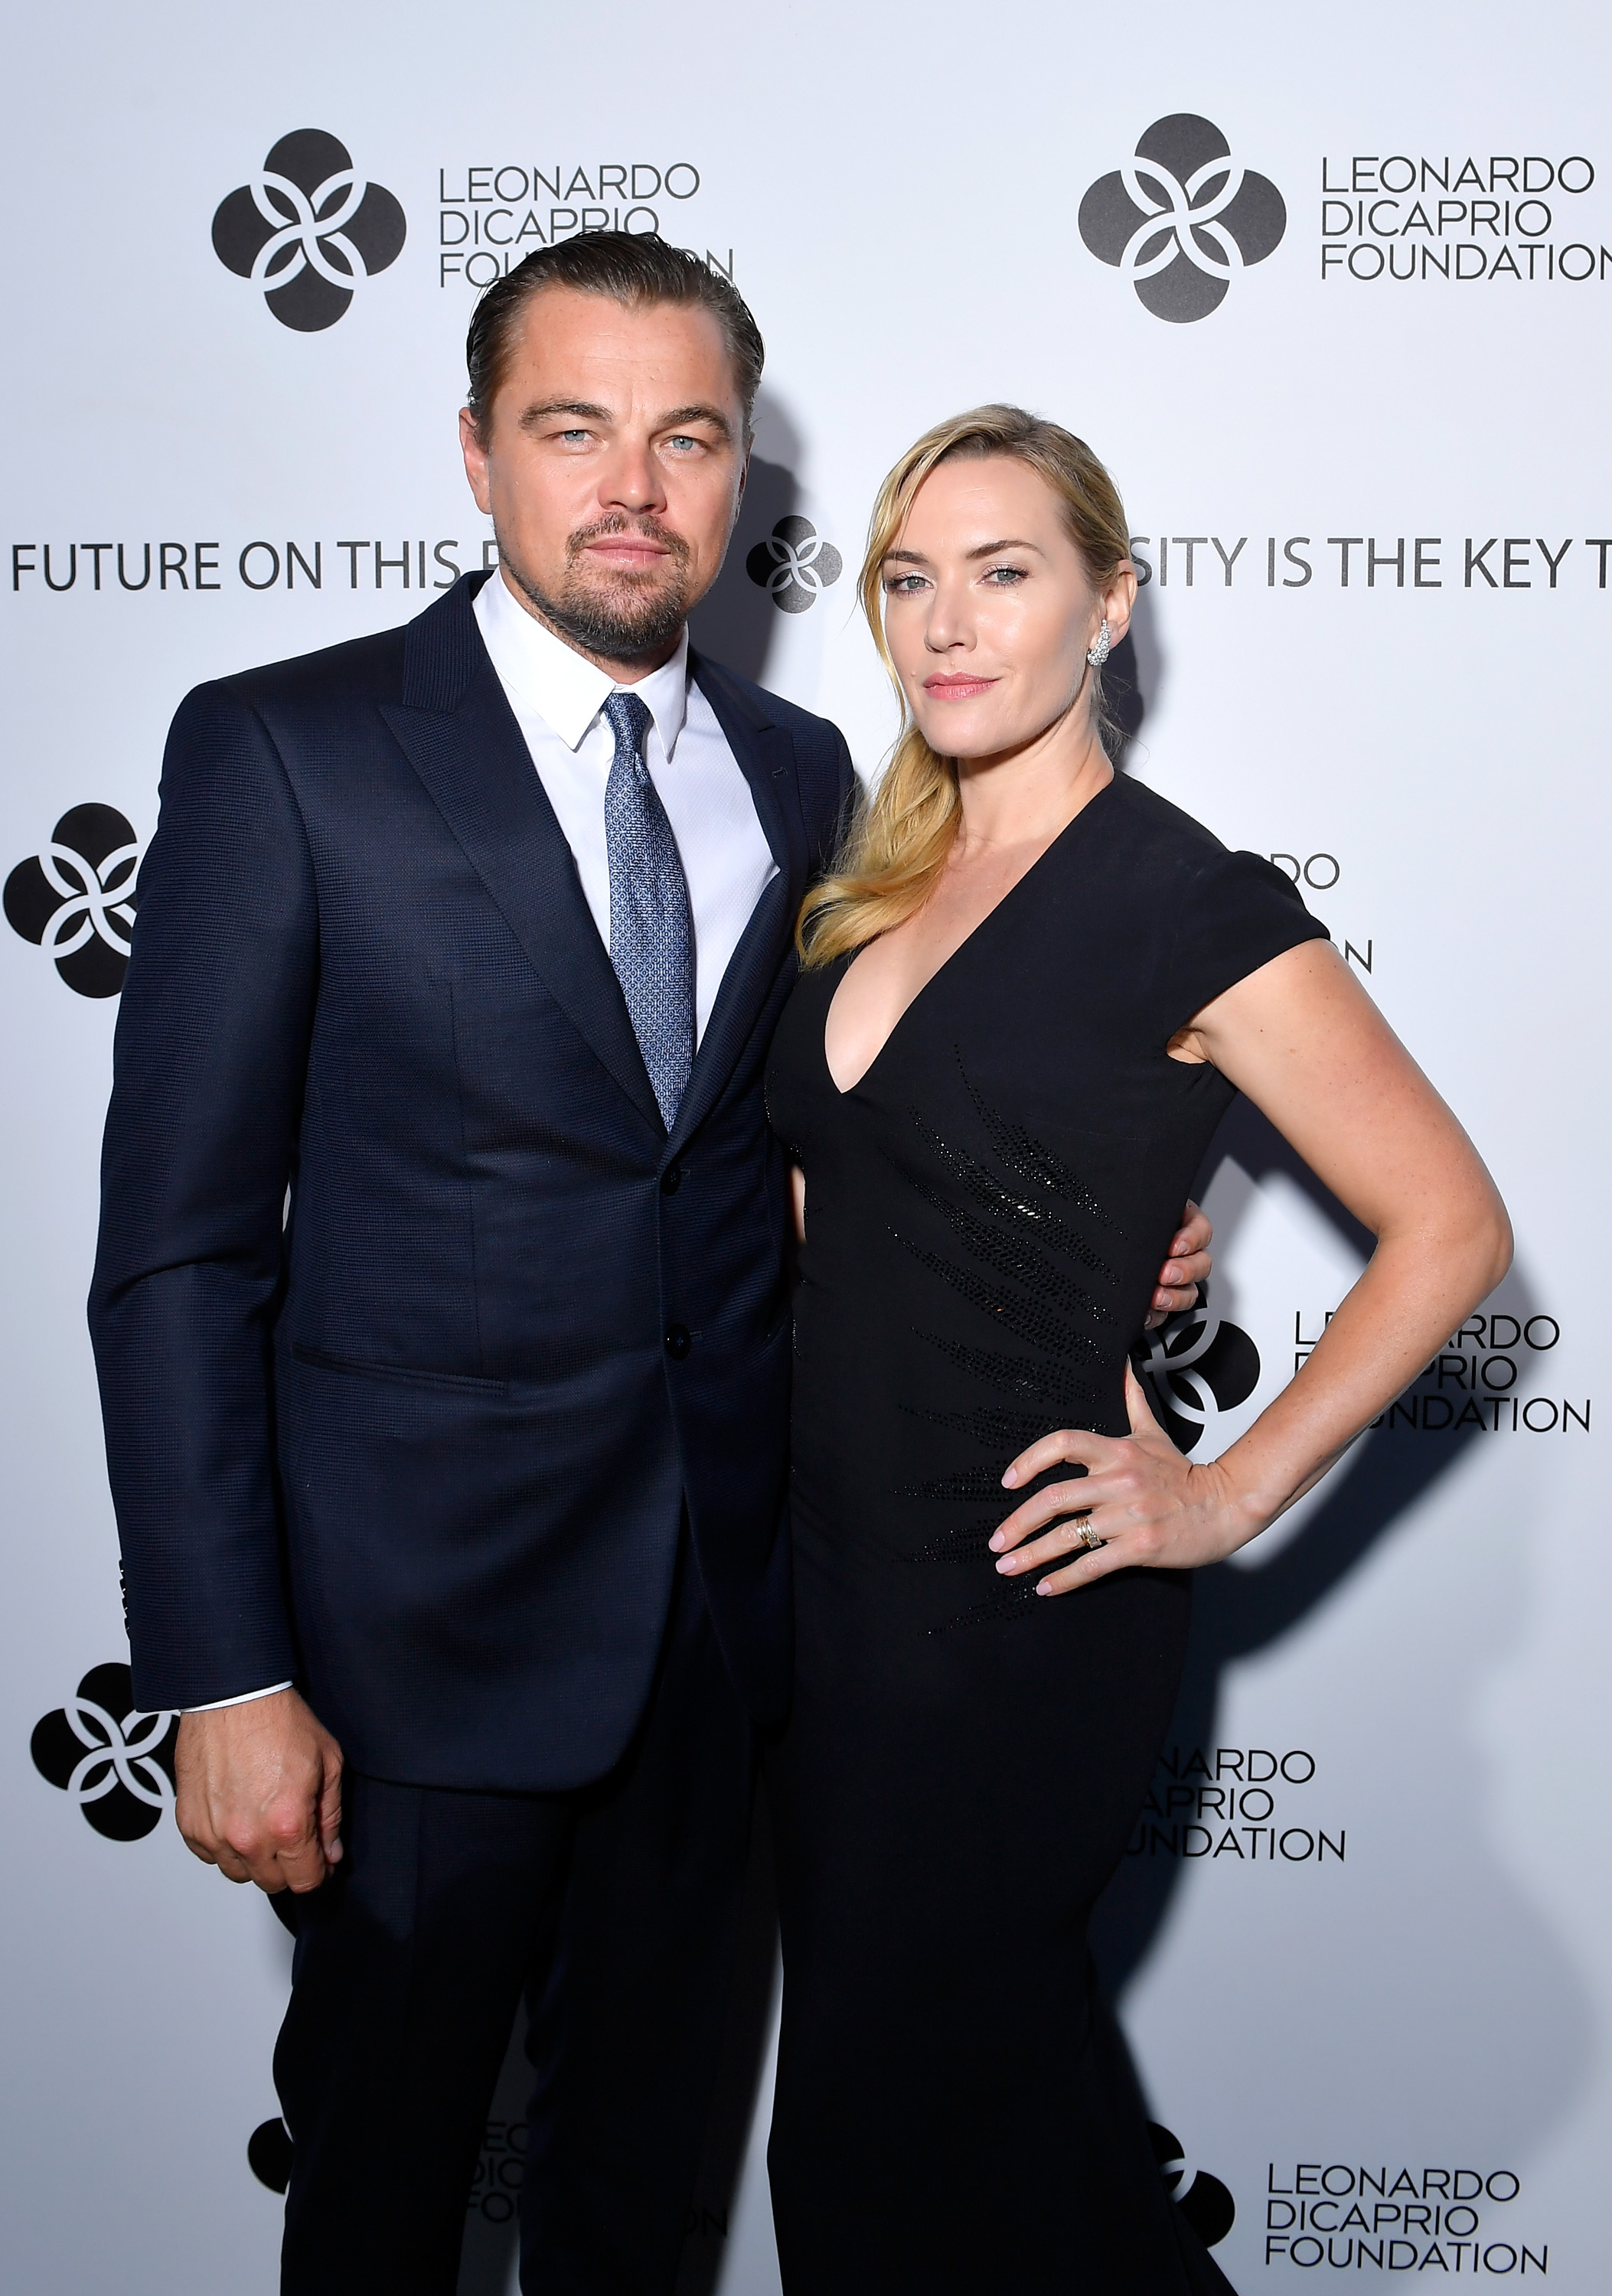 Leo in a suit and tie and Kate in a long sleeveless dress at a media event